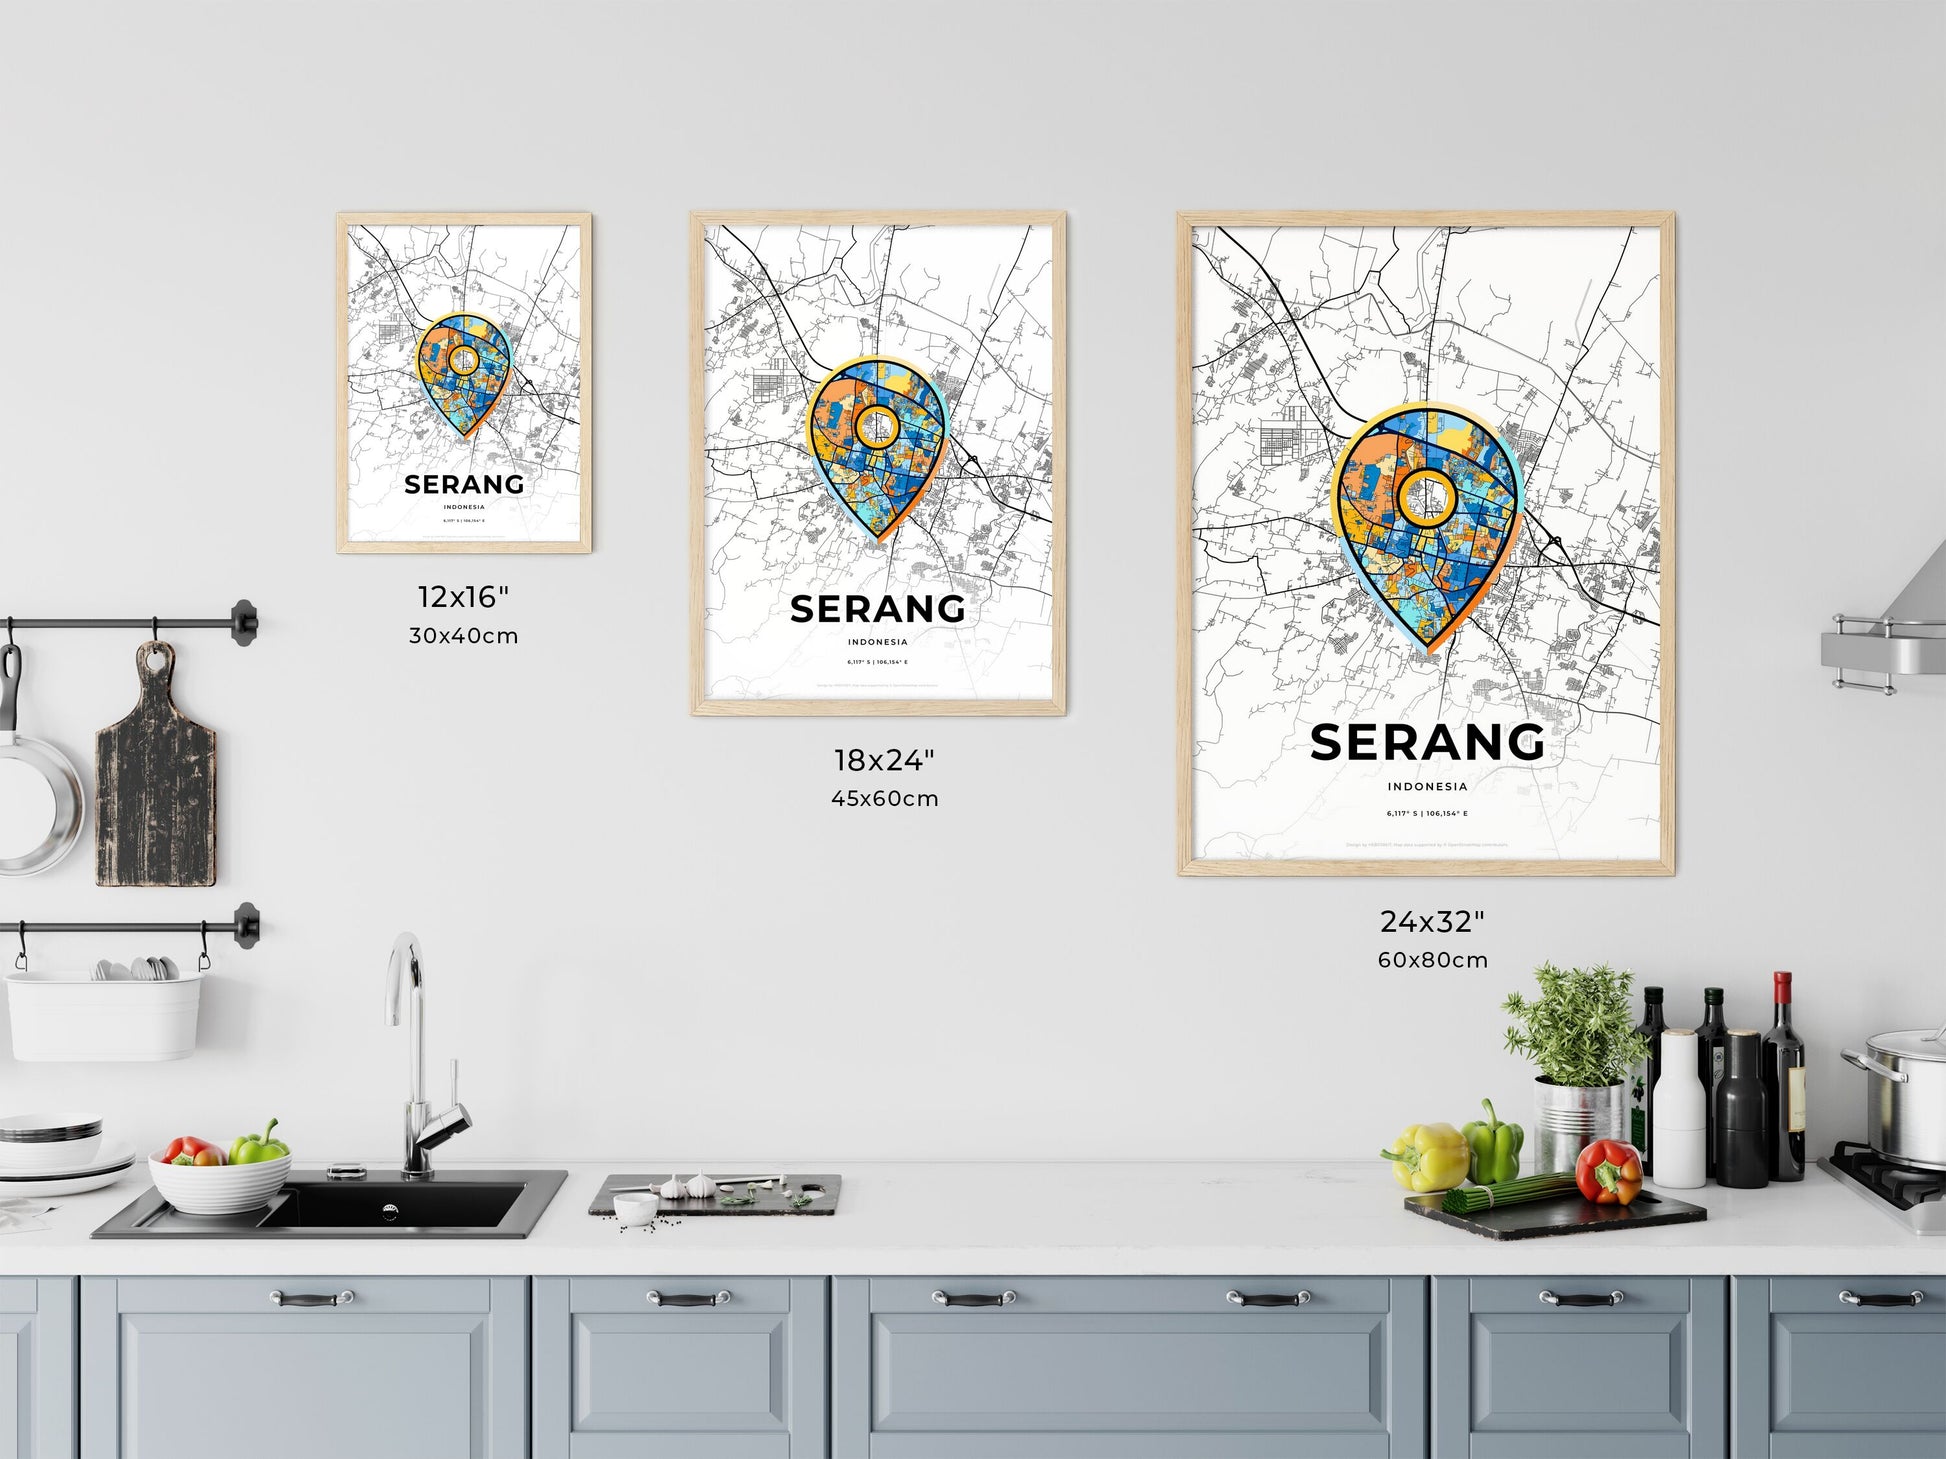 SERANG INDONESIA minimal art map with a colorful icon.